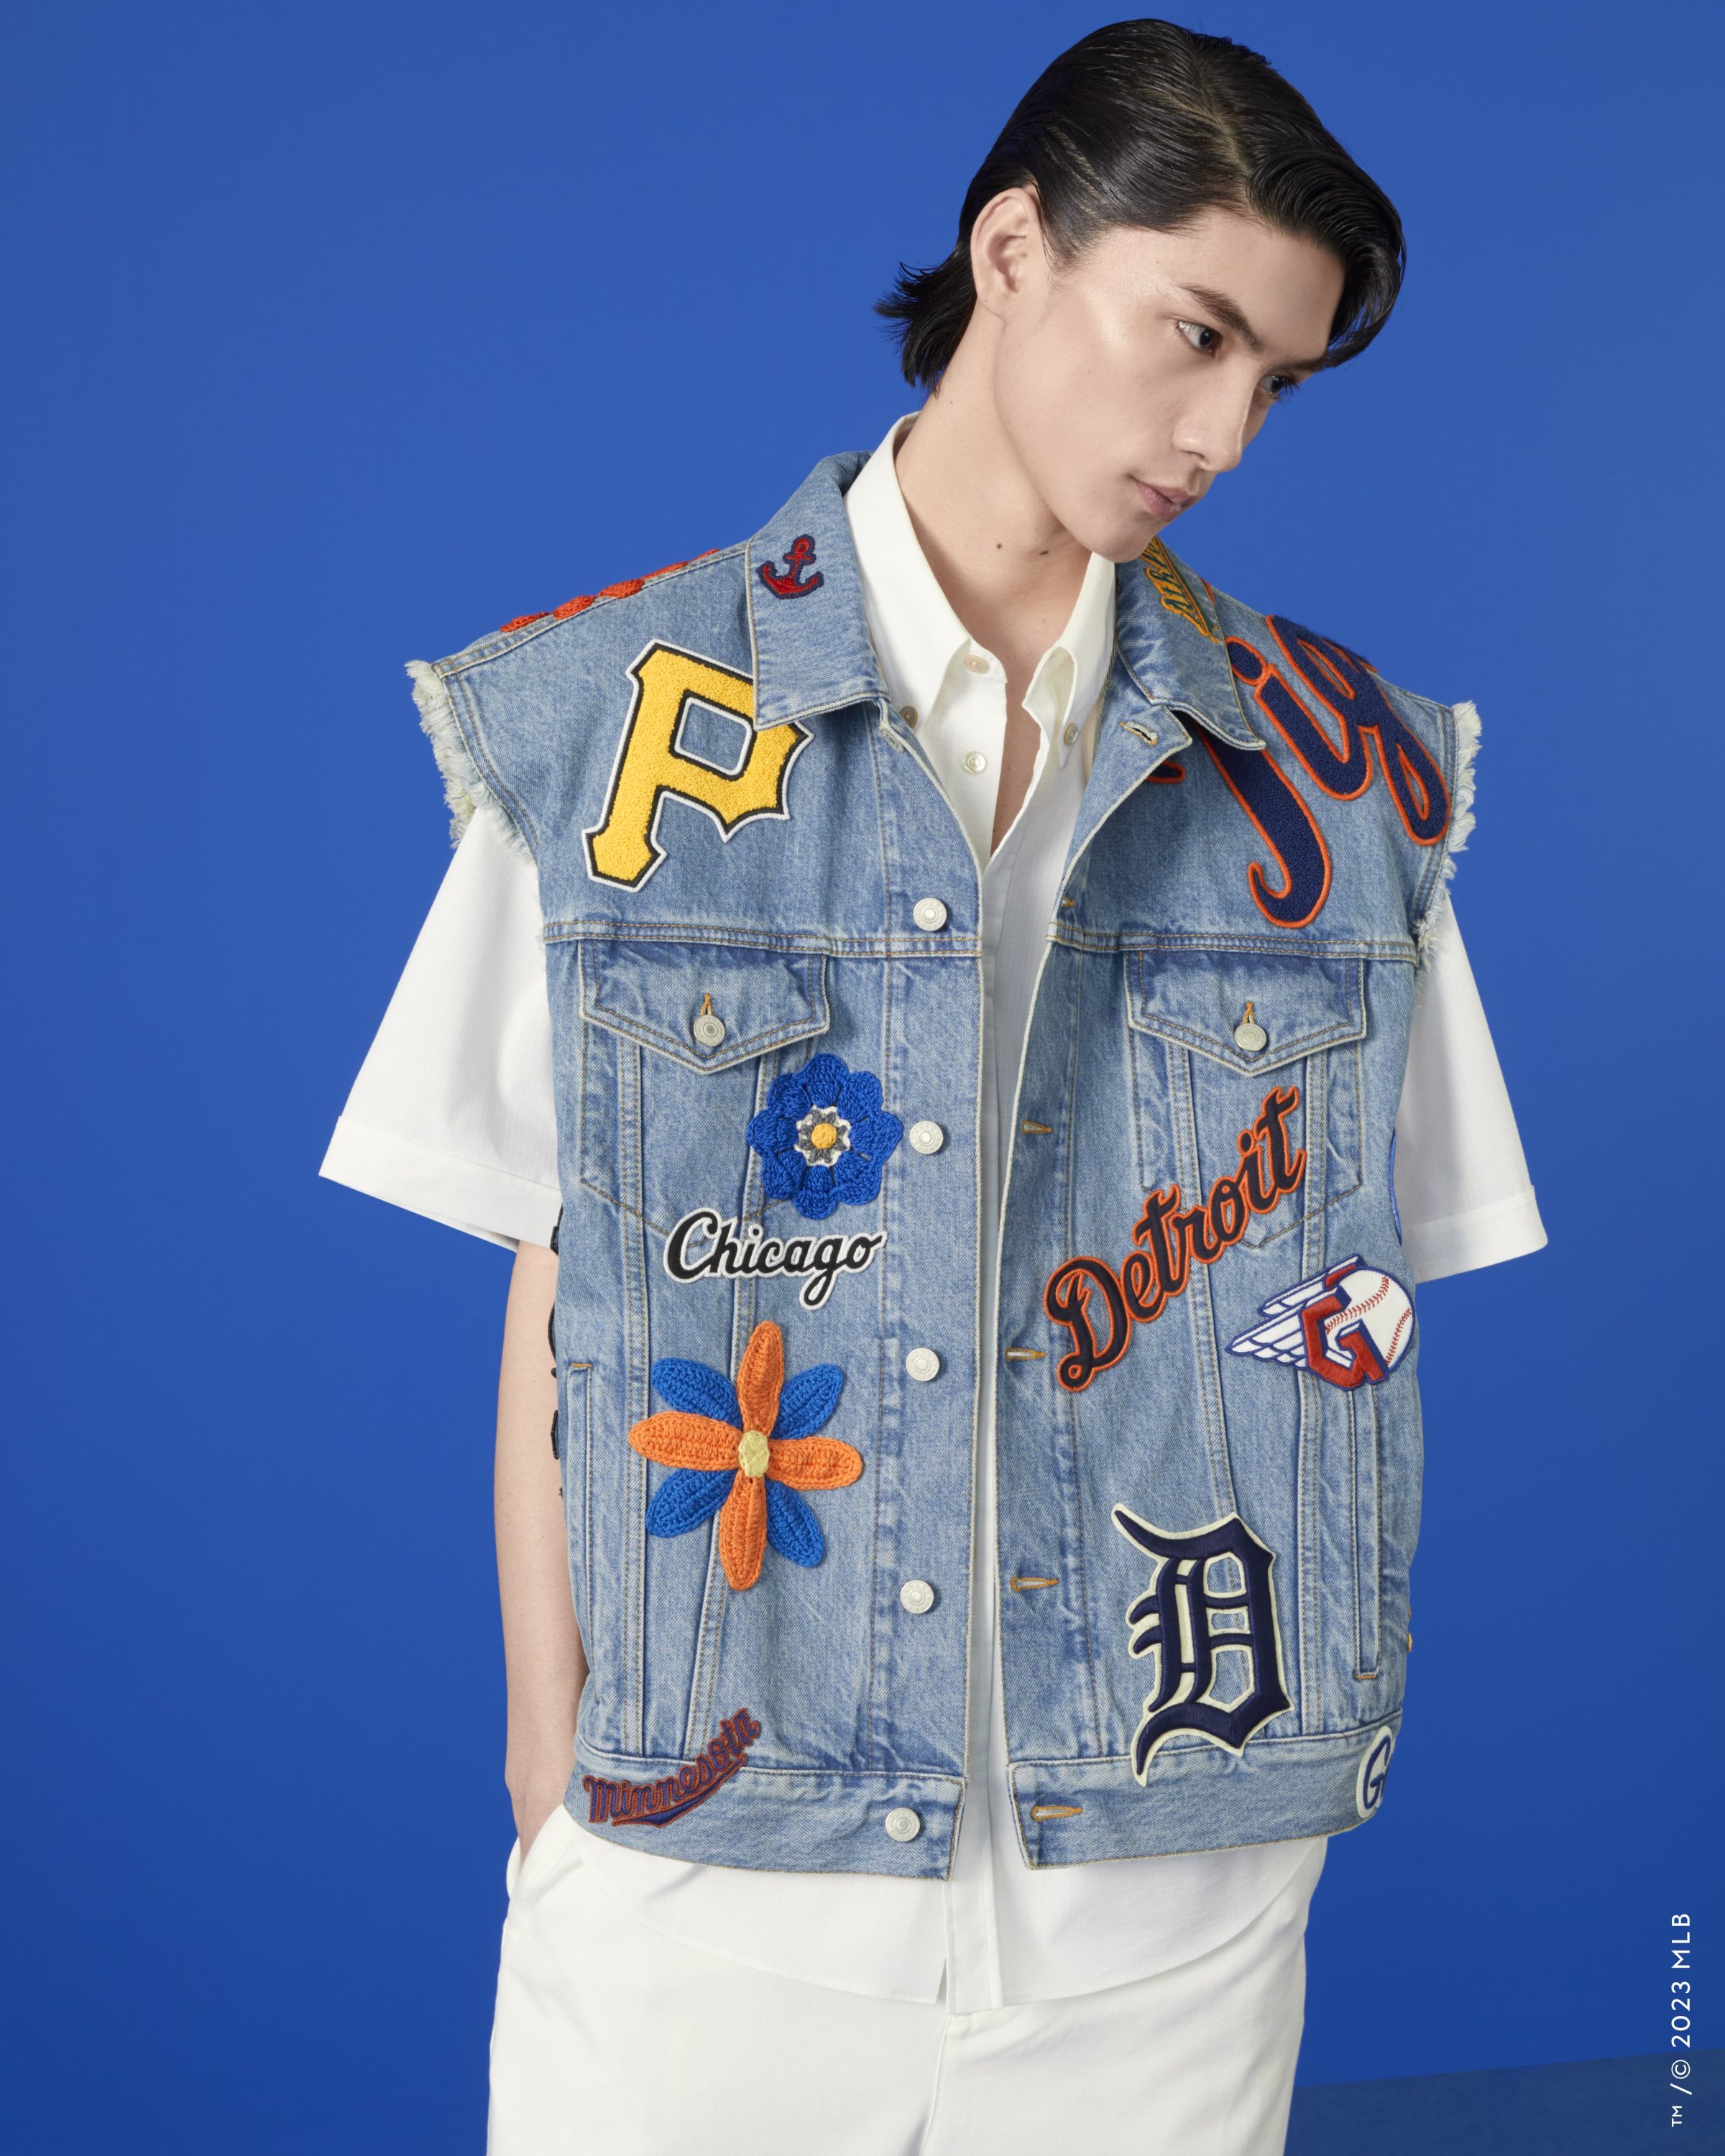 Gucci Presents the Latest MLB Capsule Collection | The Impression